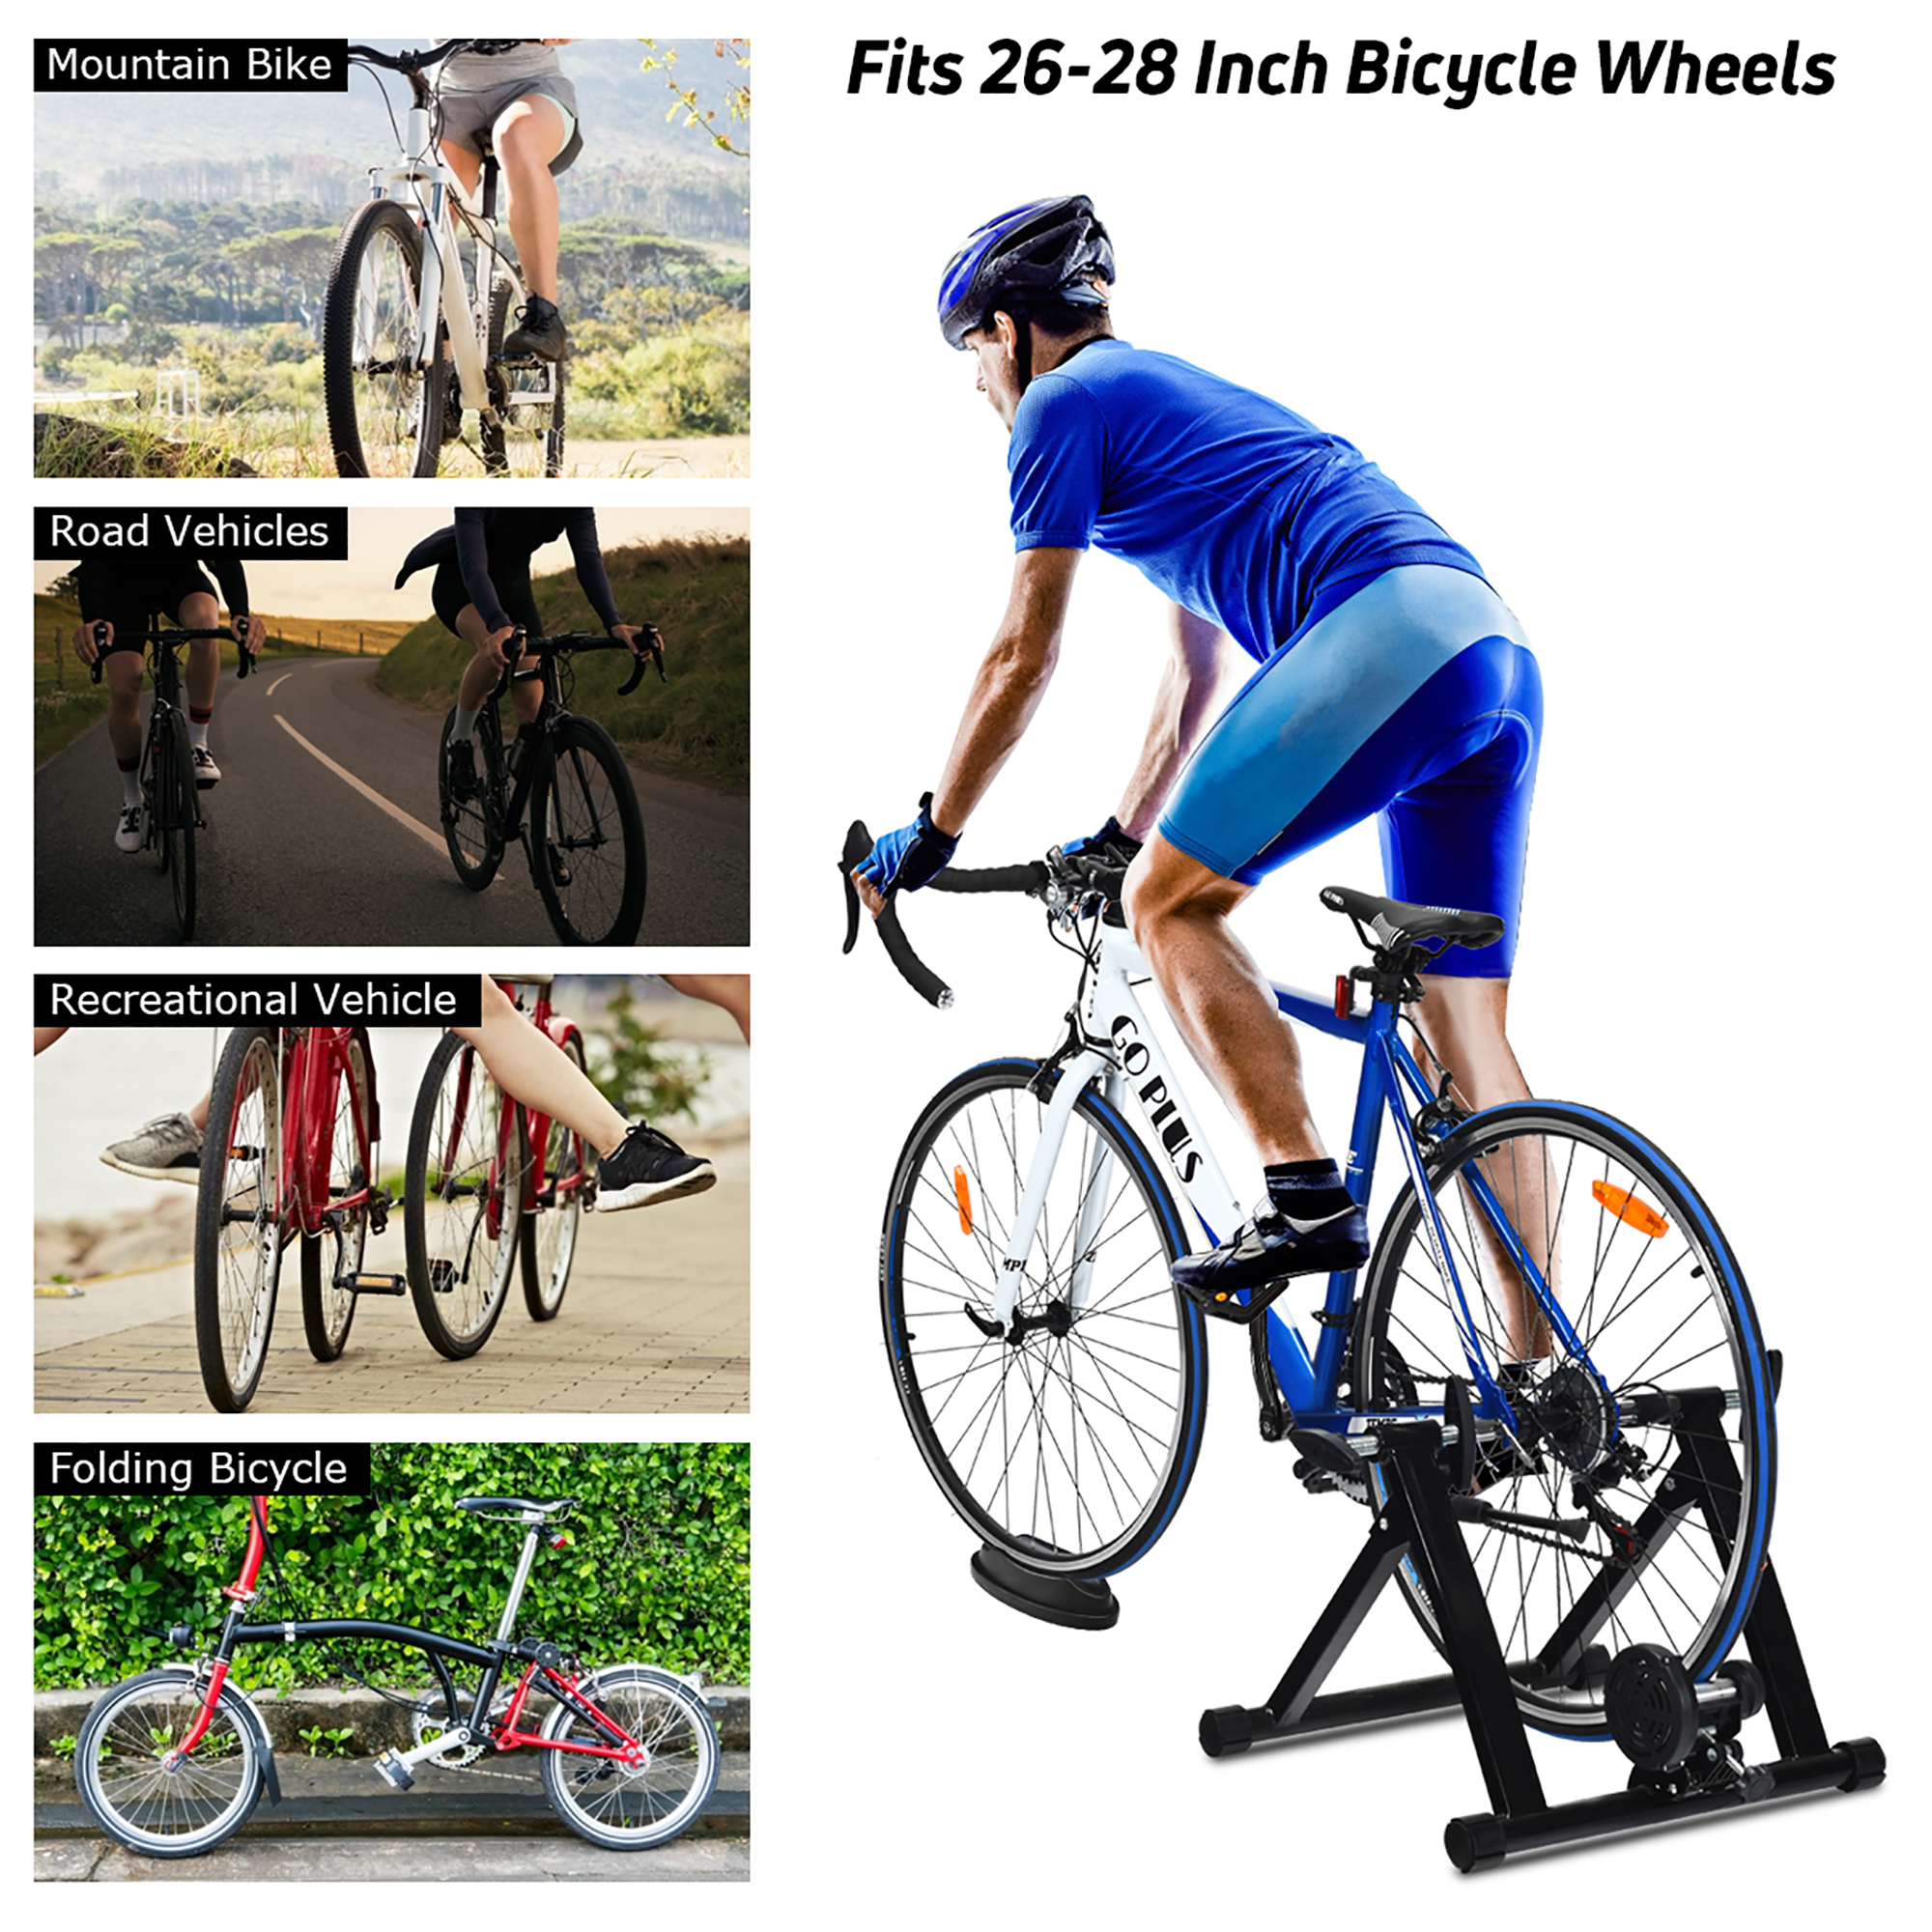 Costway Bike Trainer Folding Bicycle Indoor Exercise Training Stand